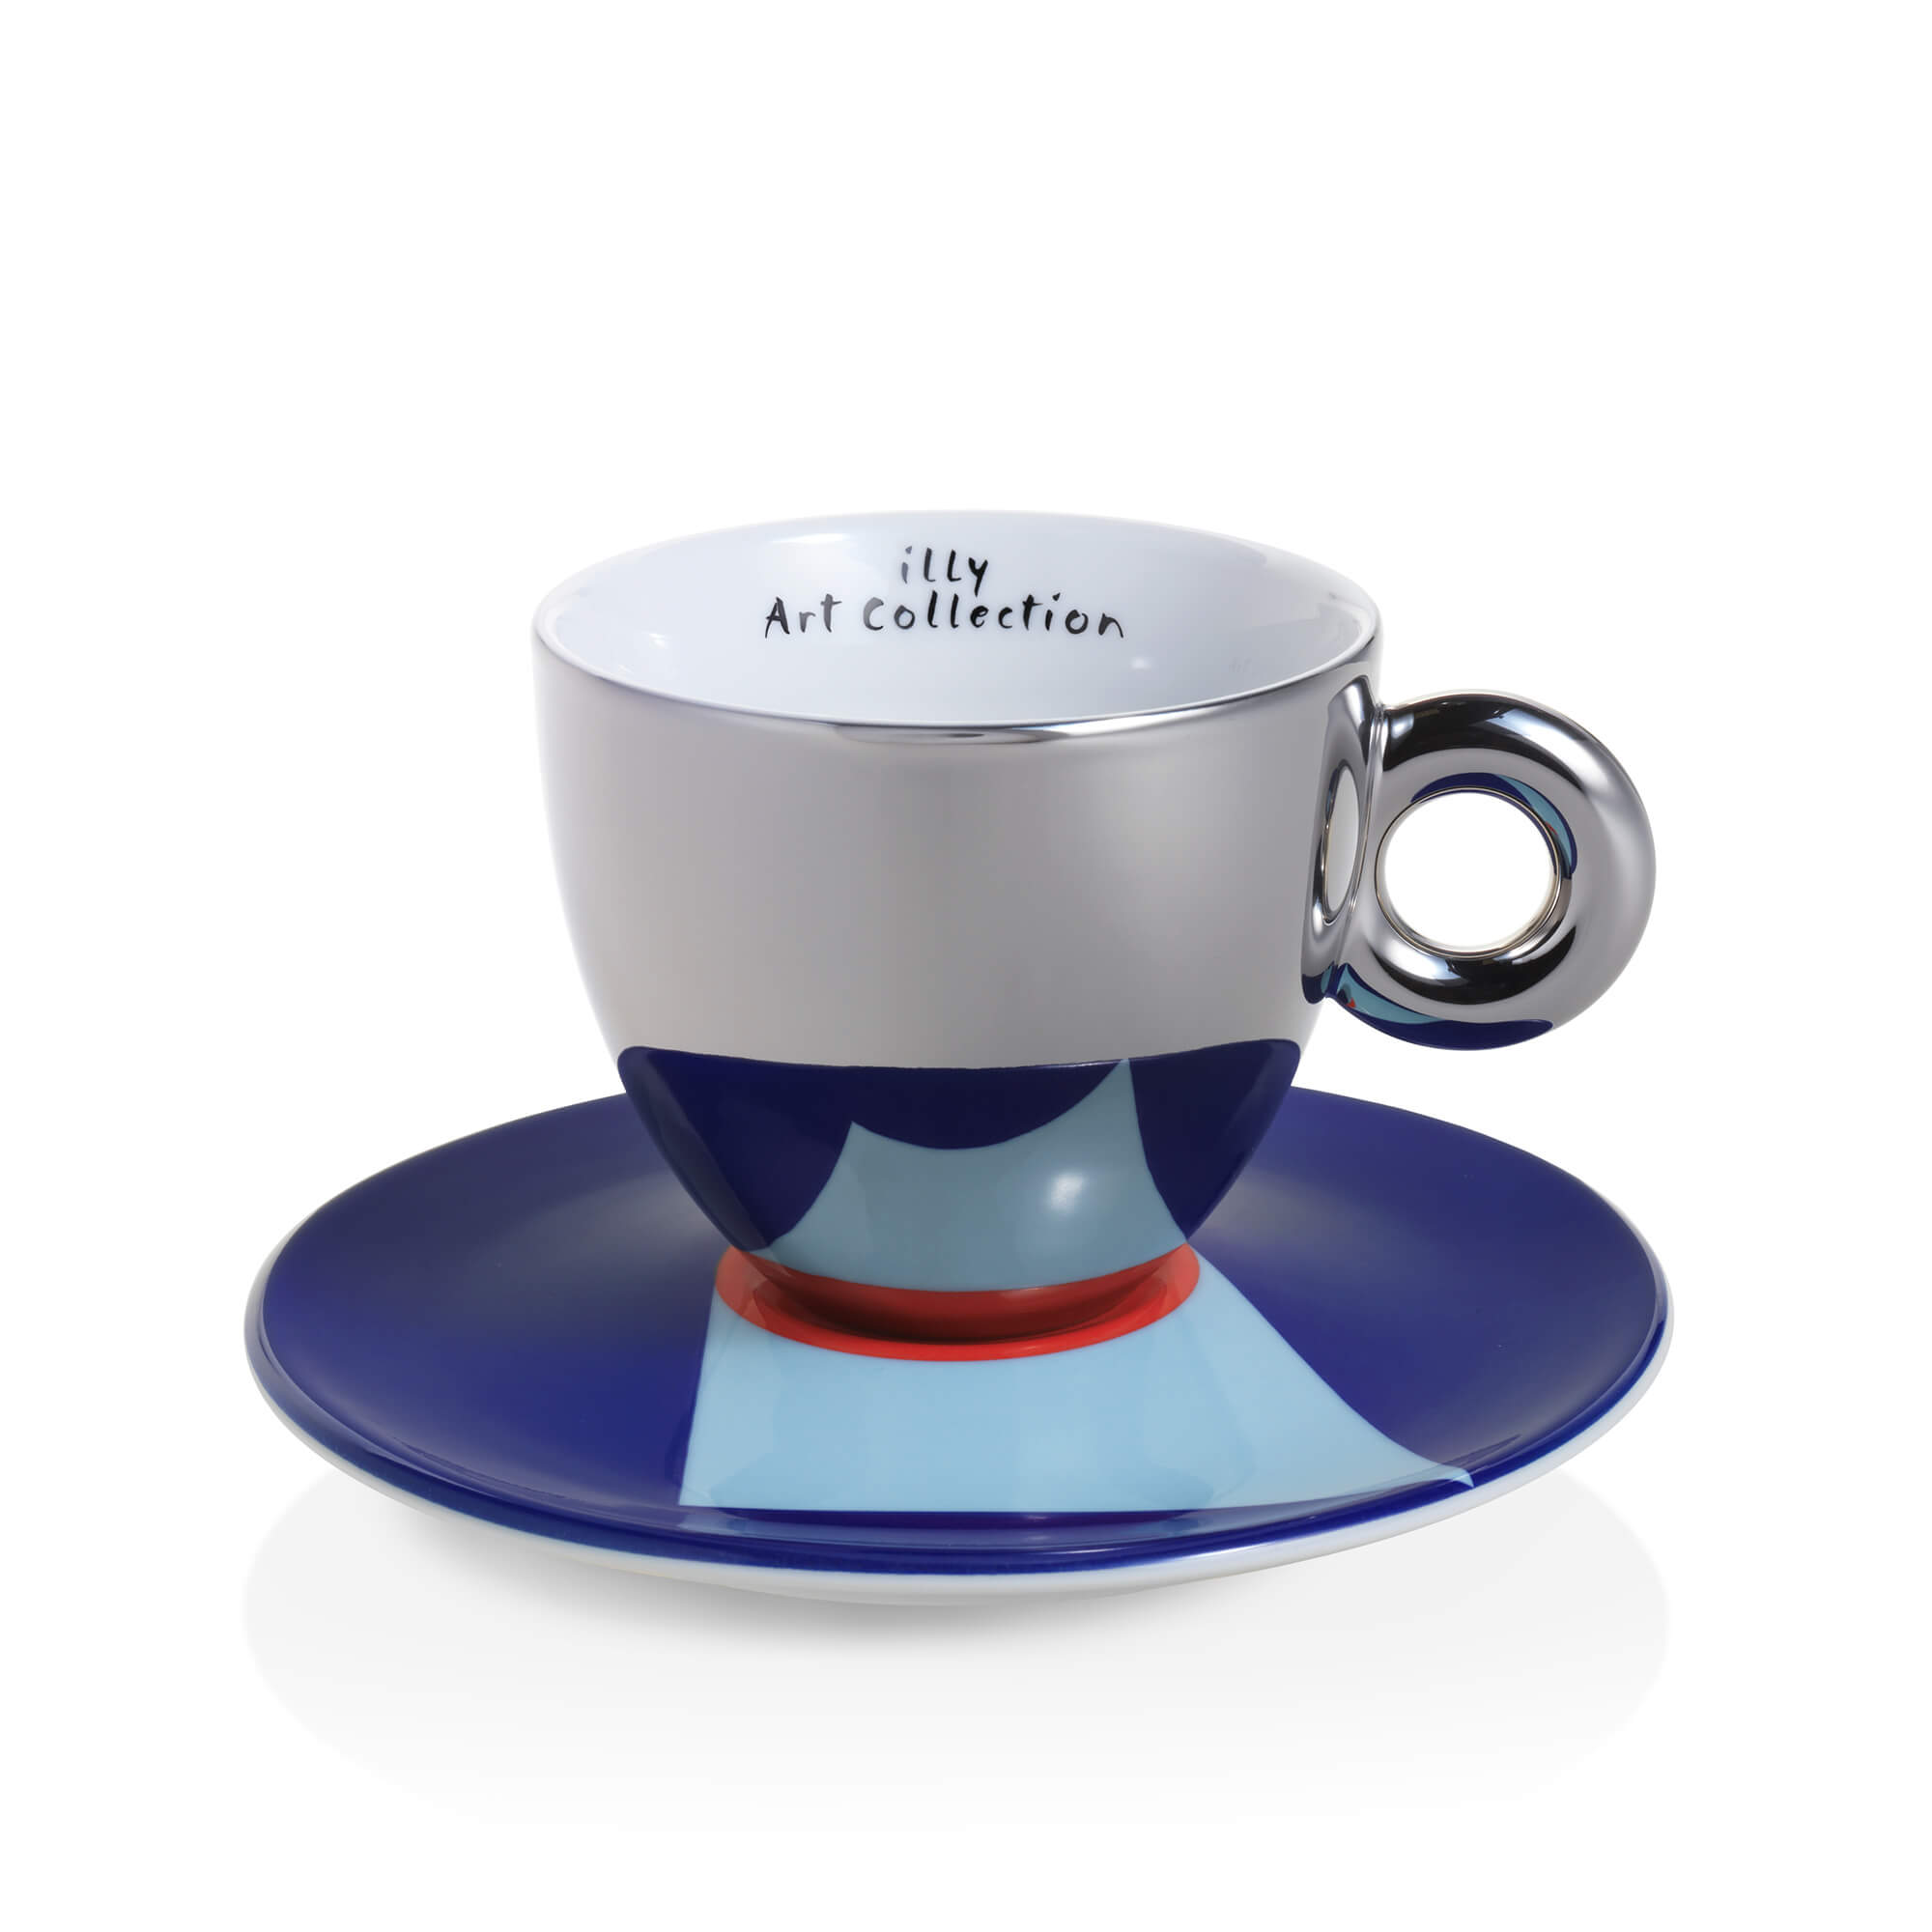 illy Art Collection STEFAN SAGMEISTER Gift Set 4 Cappuccino Cups, Cups, 02-02-6063